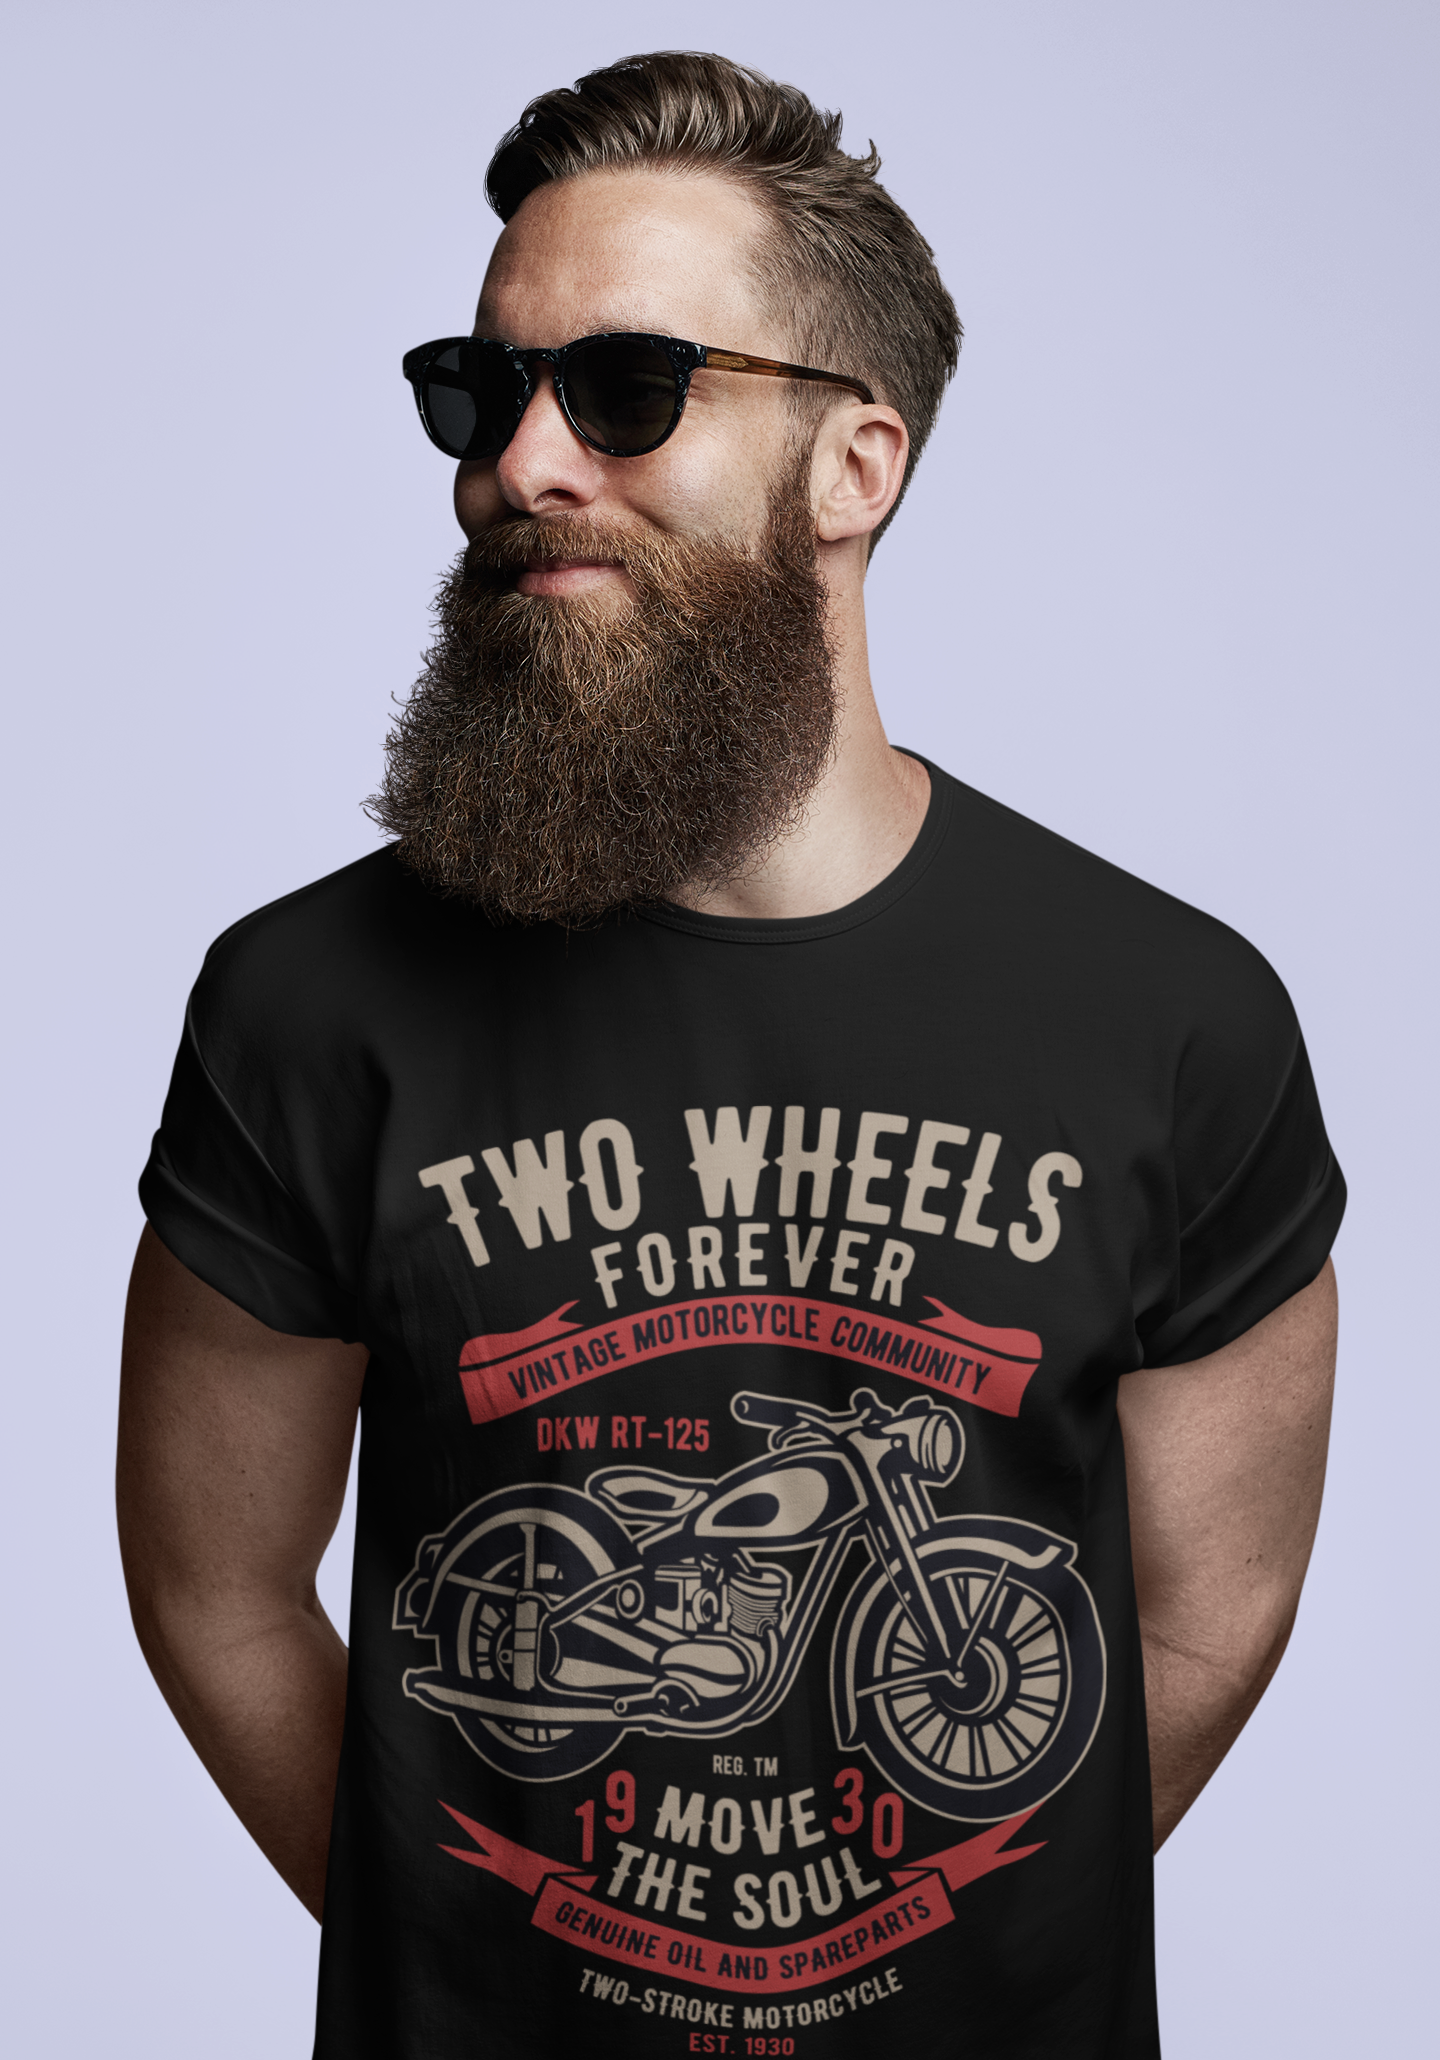 Stramme magnet praktisk ULTRABASIC Men's Graphic T-Shirt For Motorcyclists - Two Wheels Forever -  Move The Soul 1930 | affordable organic t-shirts beautiful designs